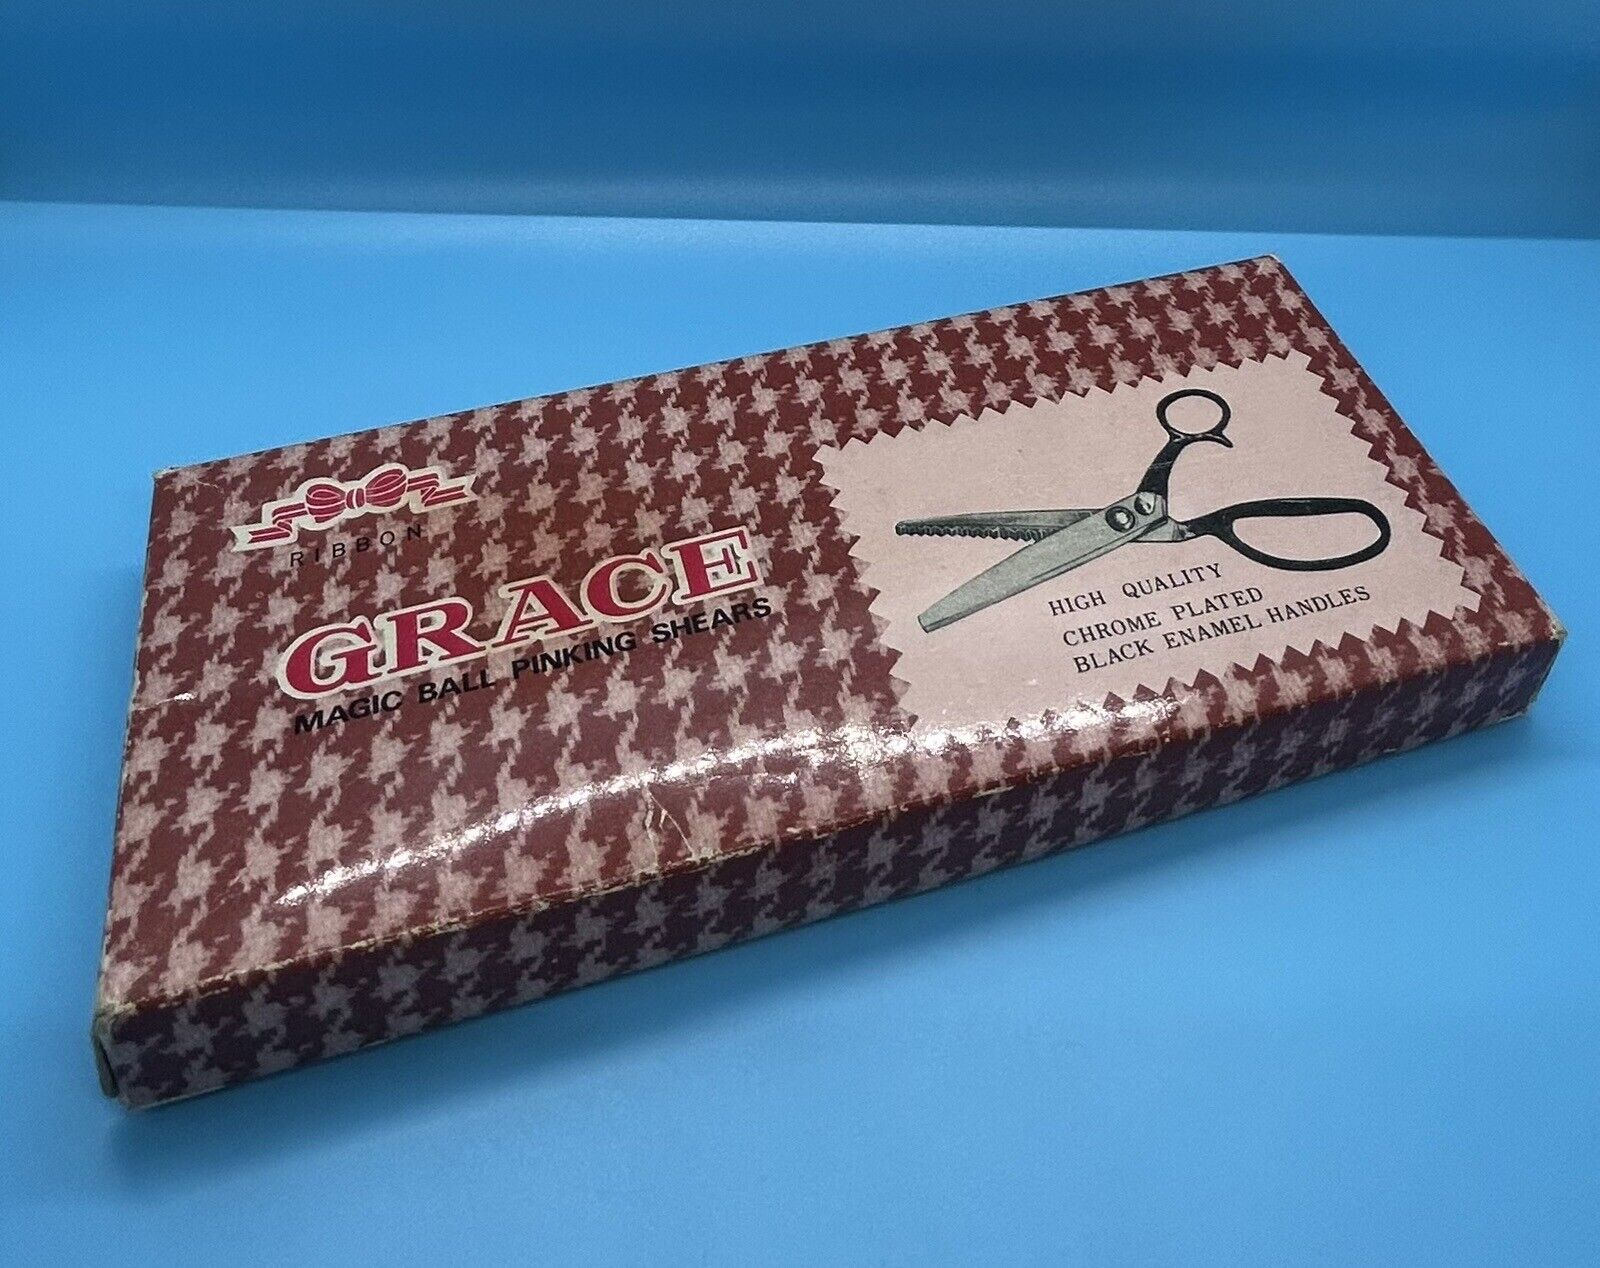 Vintage 1950s/60s Grace Magic Ball Pinking Shears In Box Scissors  Chrome Plated